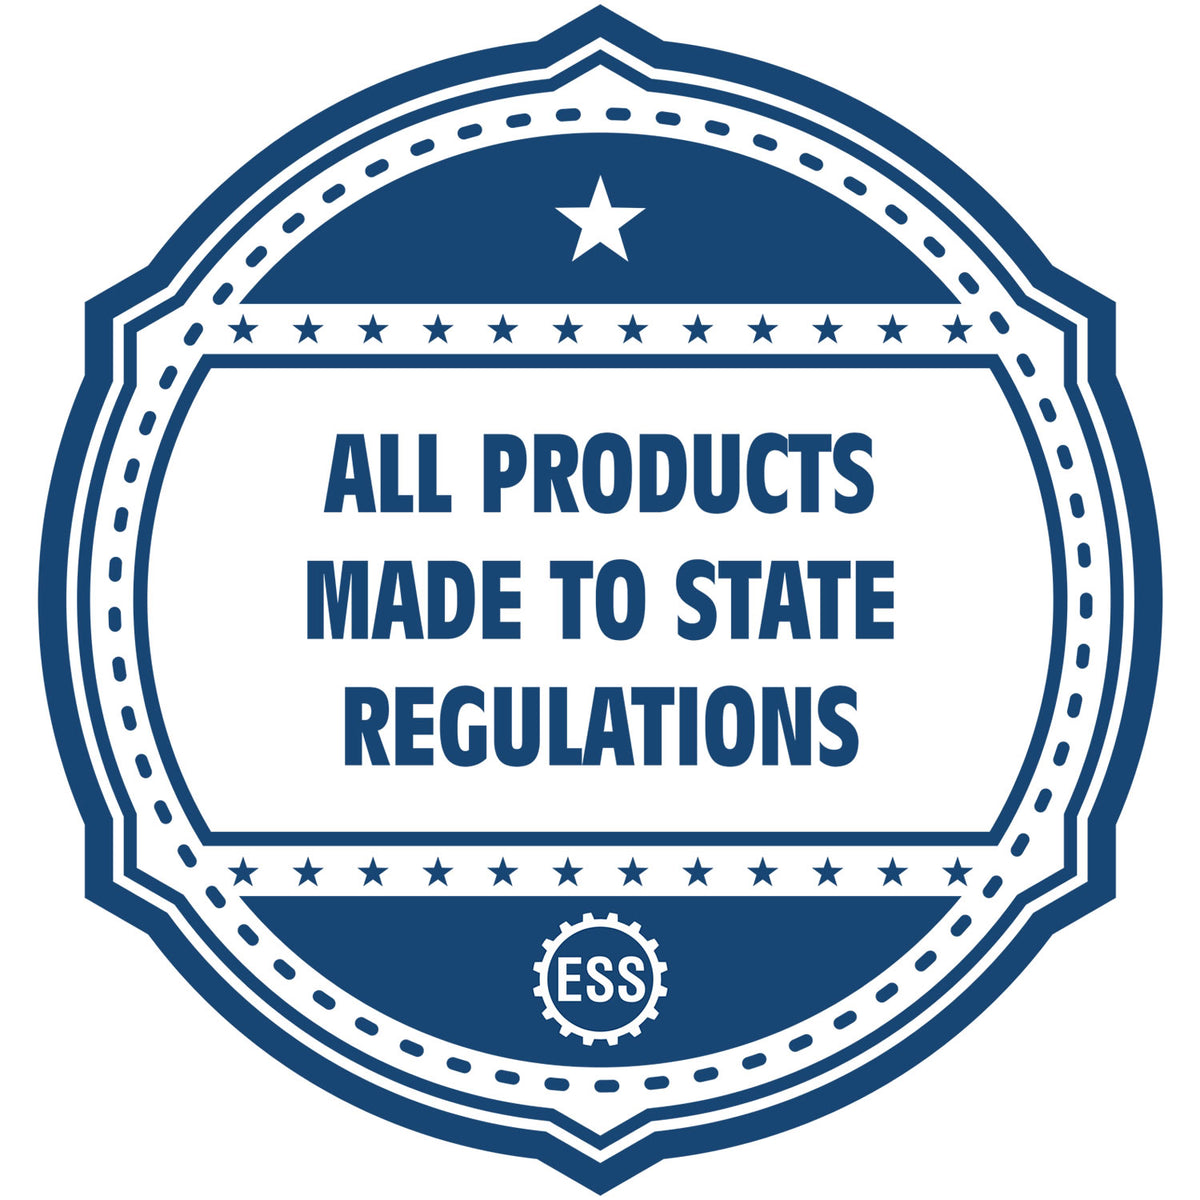 An icon or badge element for the PSI Illinois Notary Stamp showing that this product is made in compliance with state regulations.